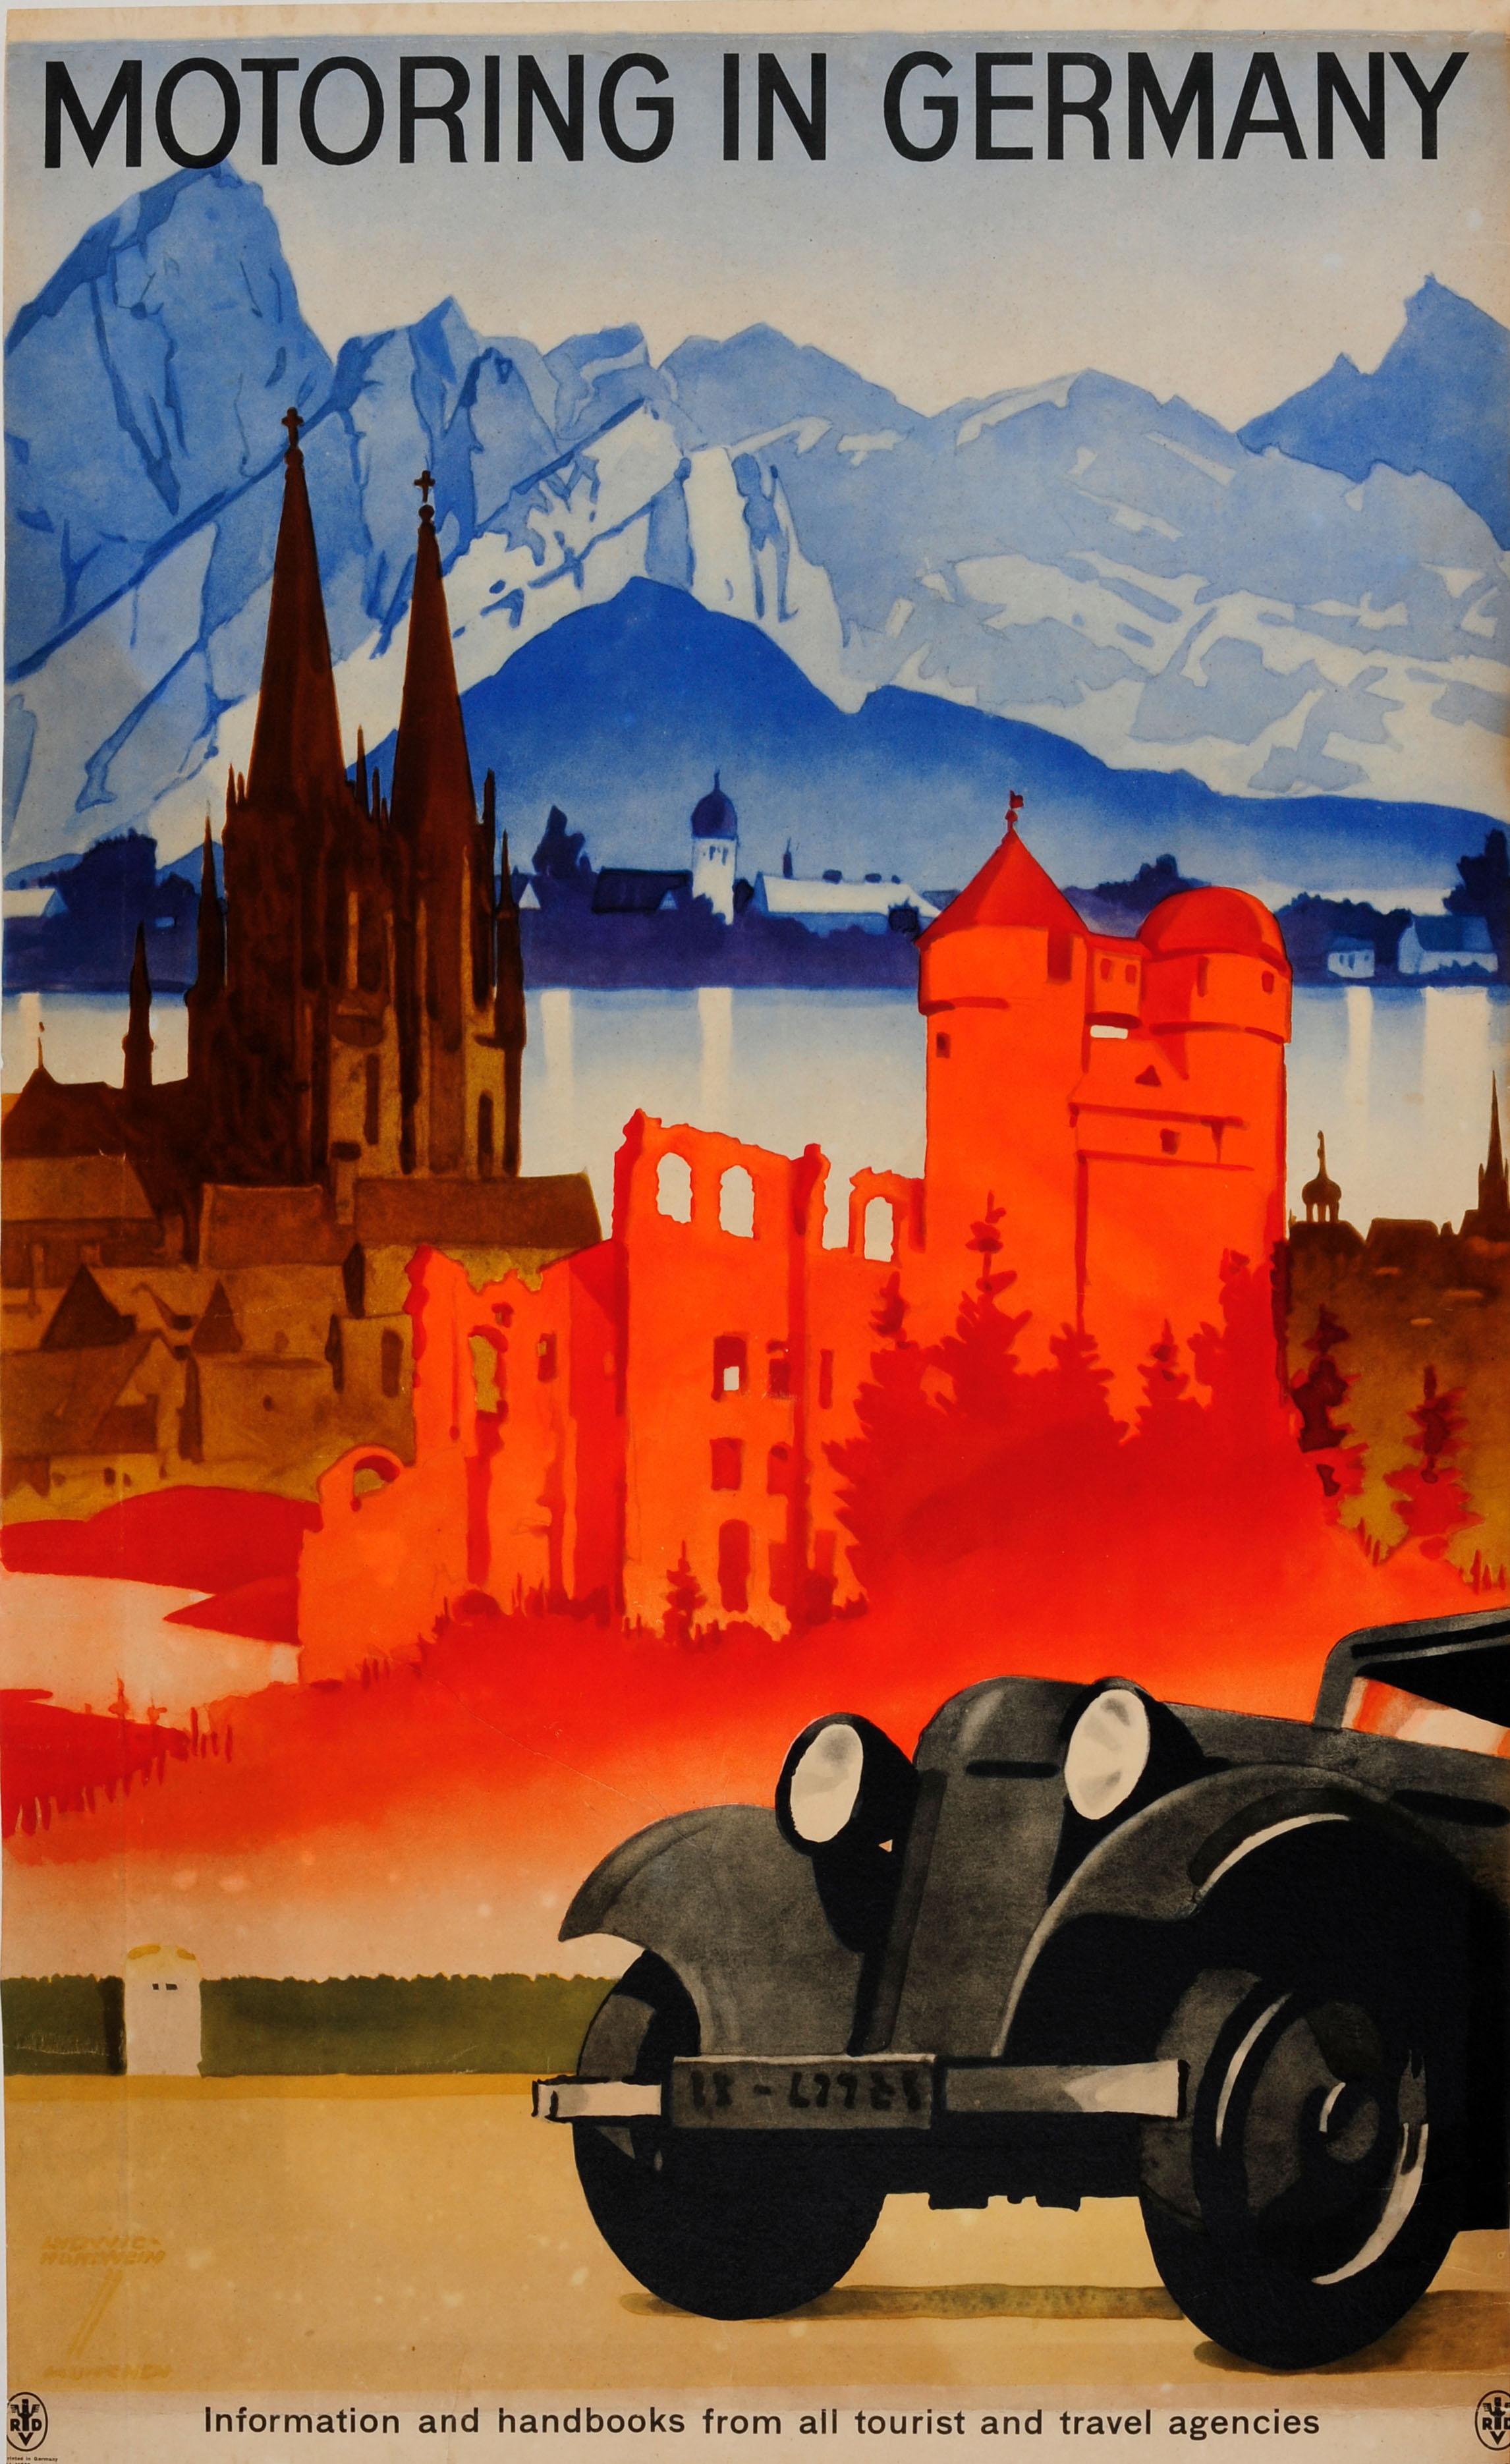 Ludwig Hohlwein Print - Original Vintage Travel Poster By Hohlwein Motoring In Germany Classic Car Tours